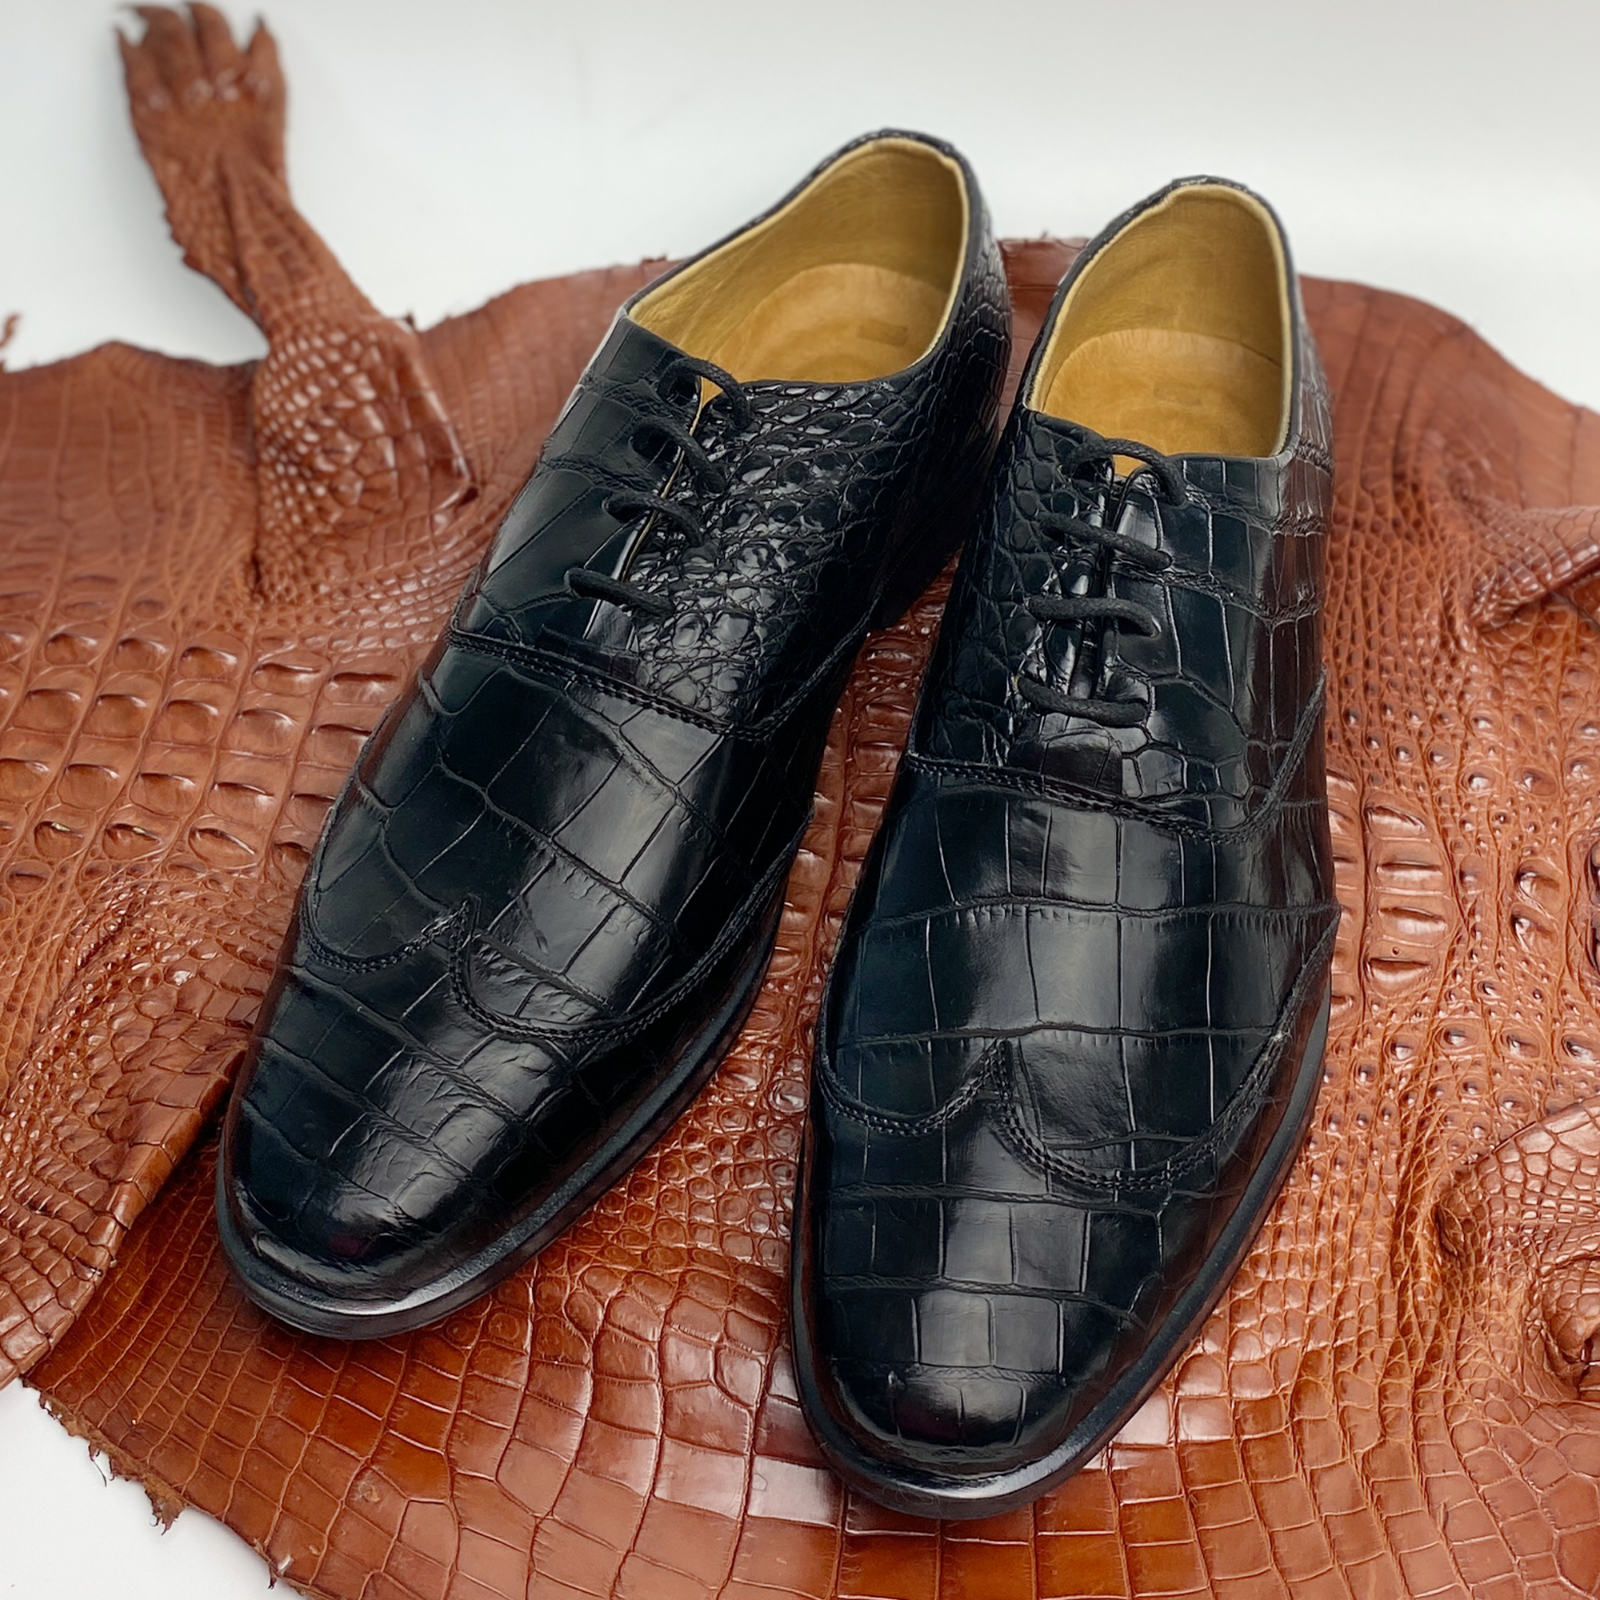 Pre-owned Handmade Black Men Alligator Oxford Shoes Genuine Crocodile Leather Lace-up Brogues